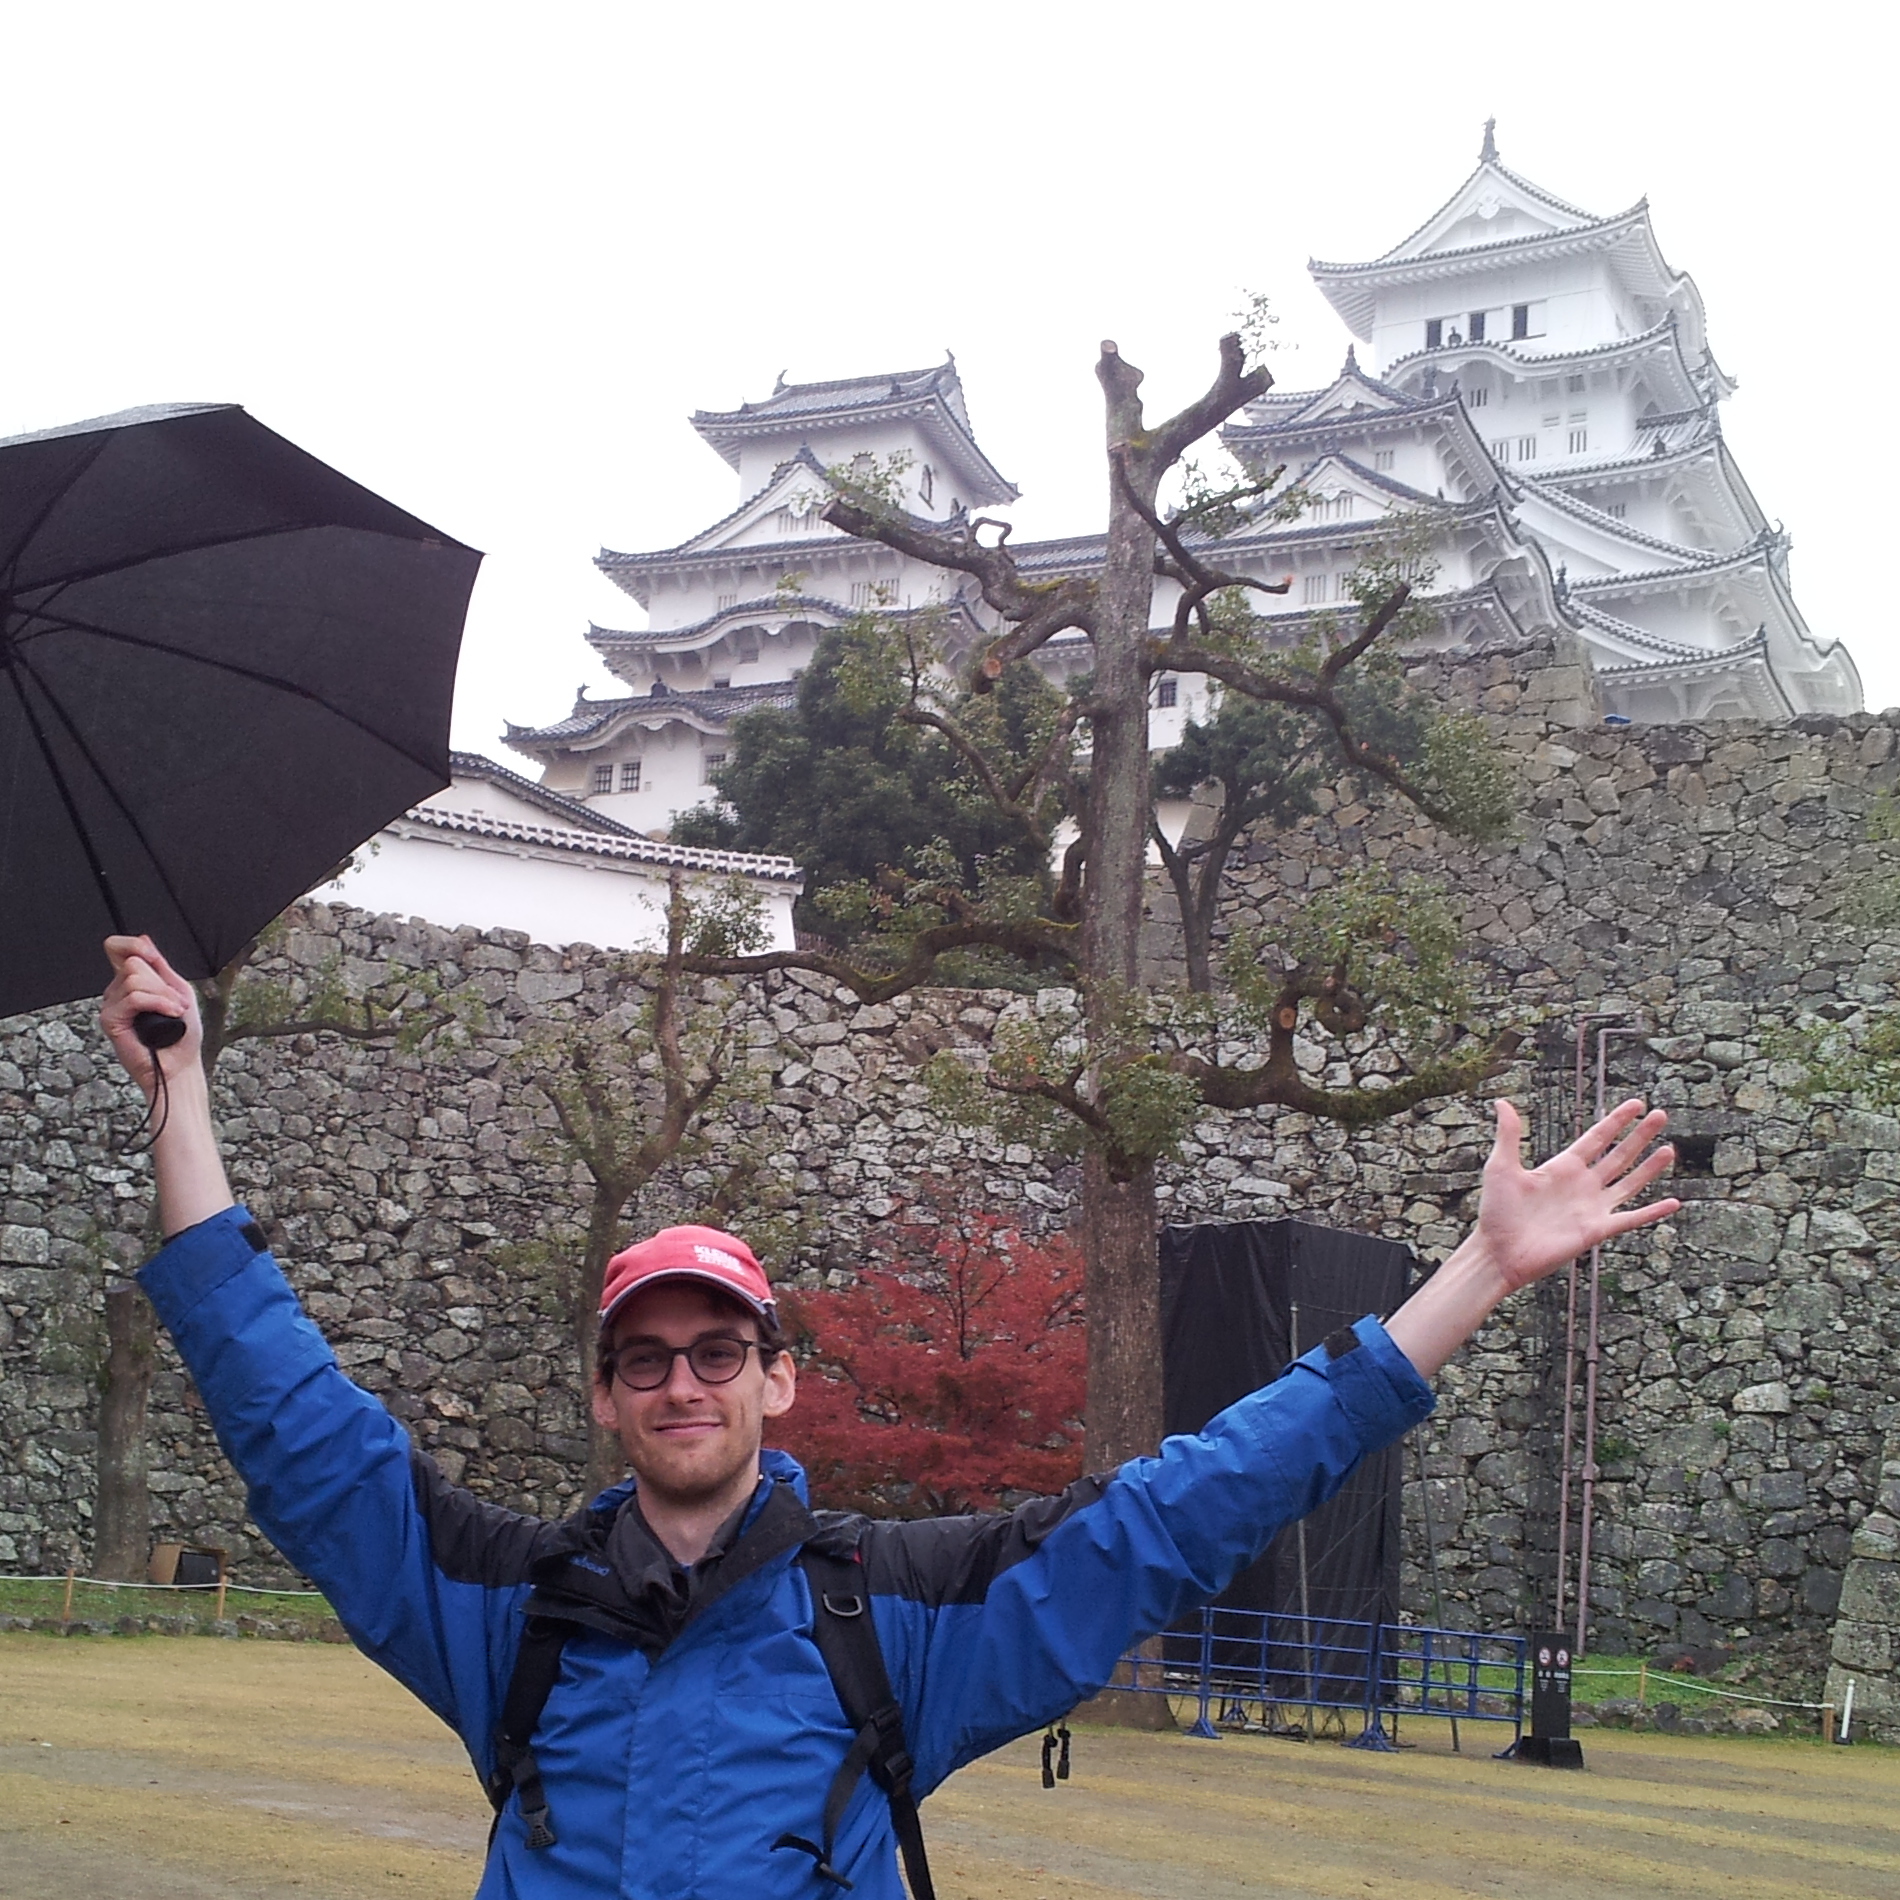 Lukas in foreground with an umbrella and Himeji Castle in the background